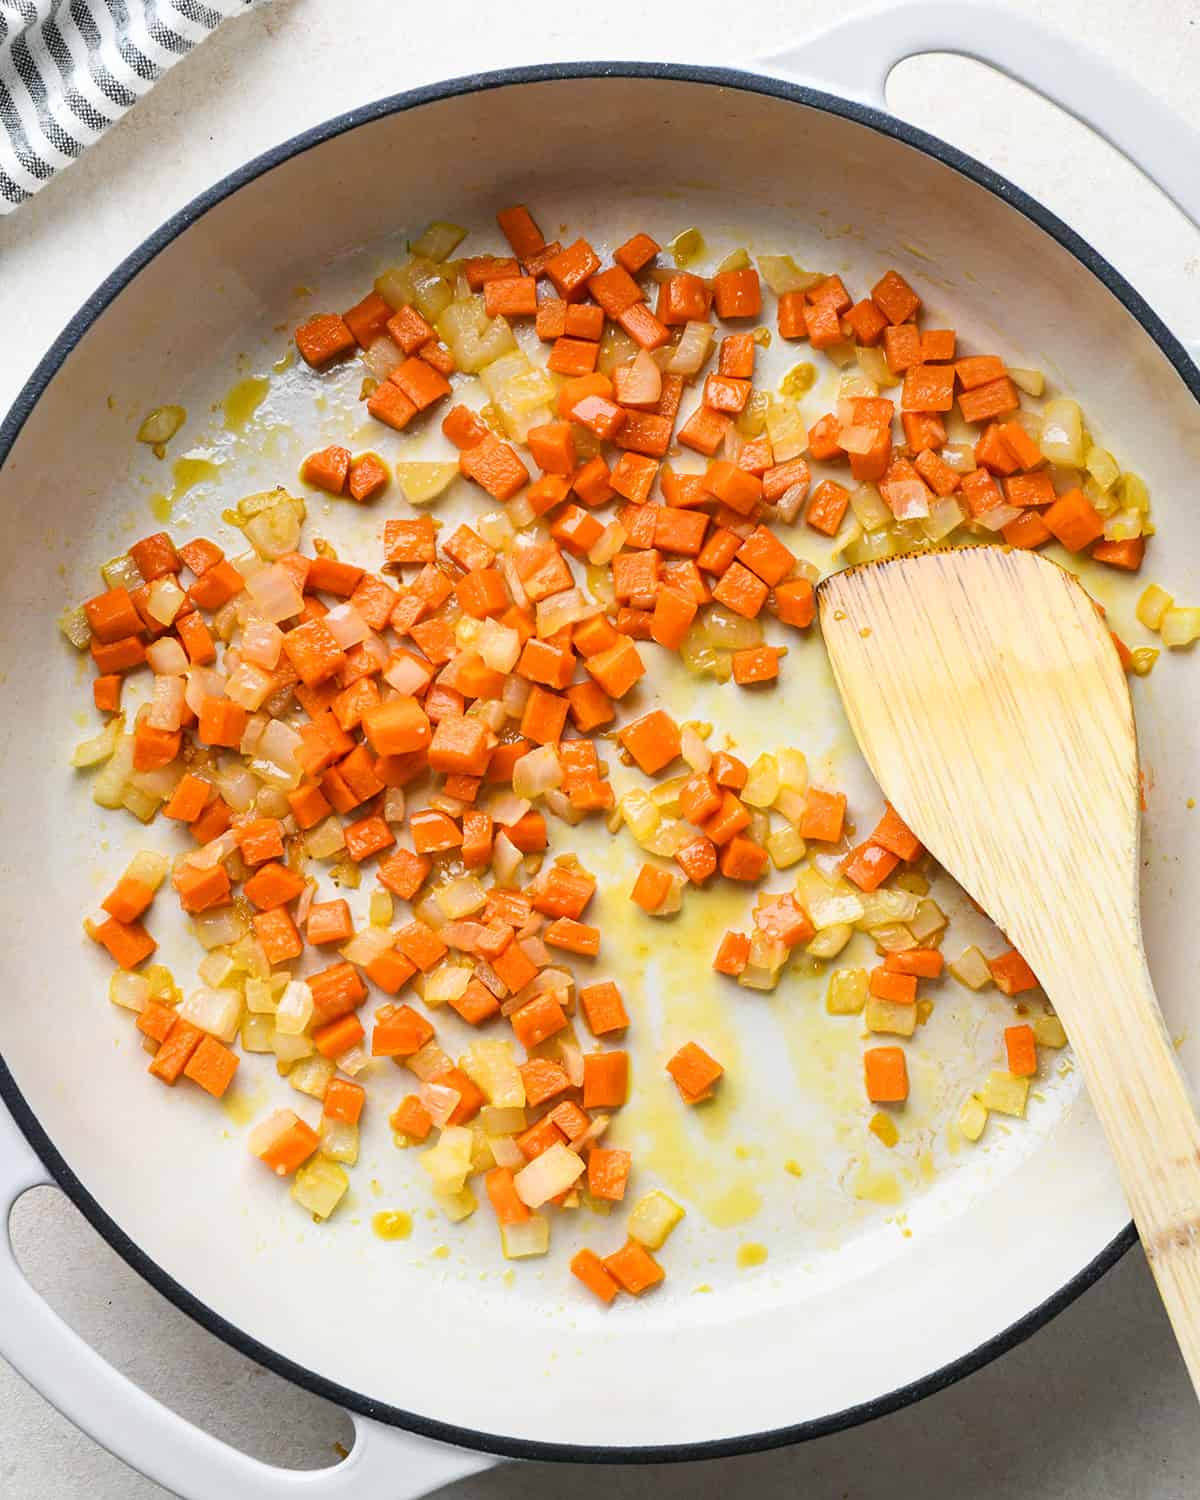 How to Make Fried Rice - carrots, garlic, onion and sesame oil in a pan after cooking